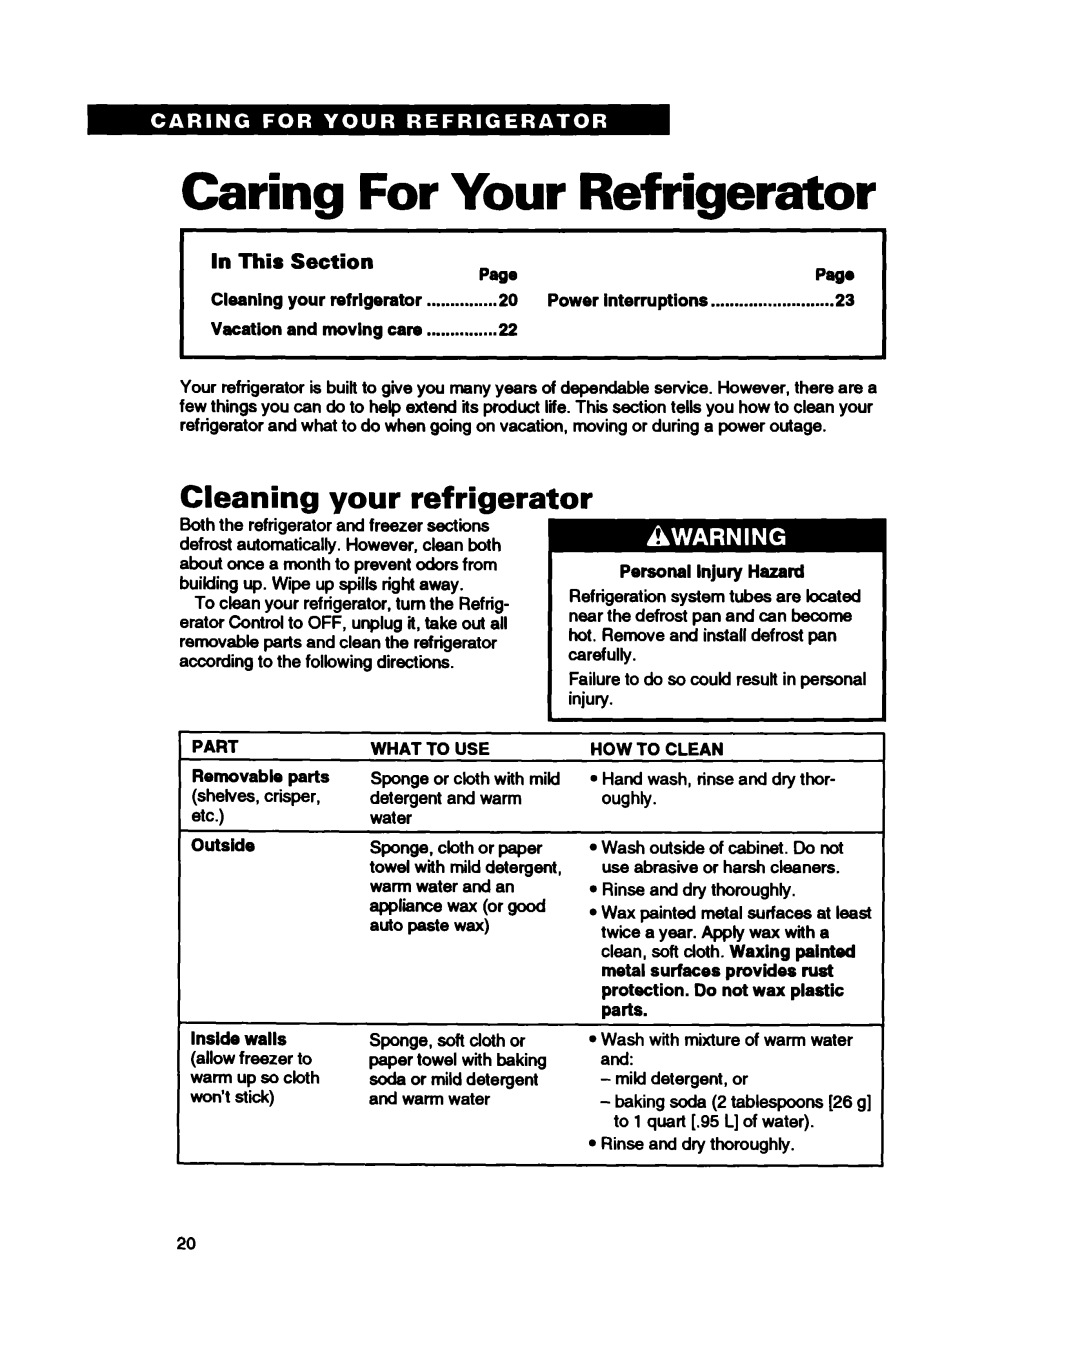 Estate TS25AQ Caring For Your Refrigerator, Cleaning your refrigerator, In This Section PageWI@, Vacation and moving care 